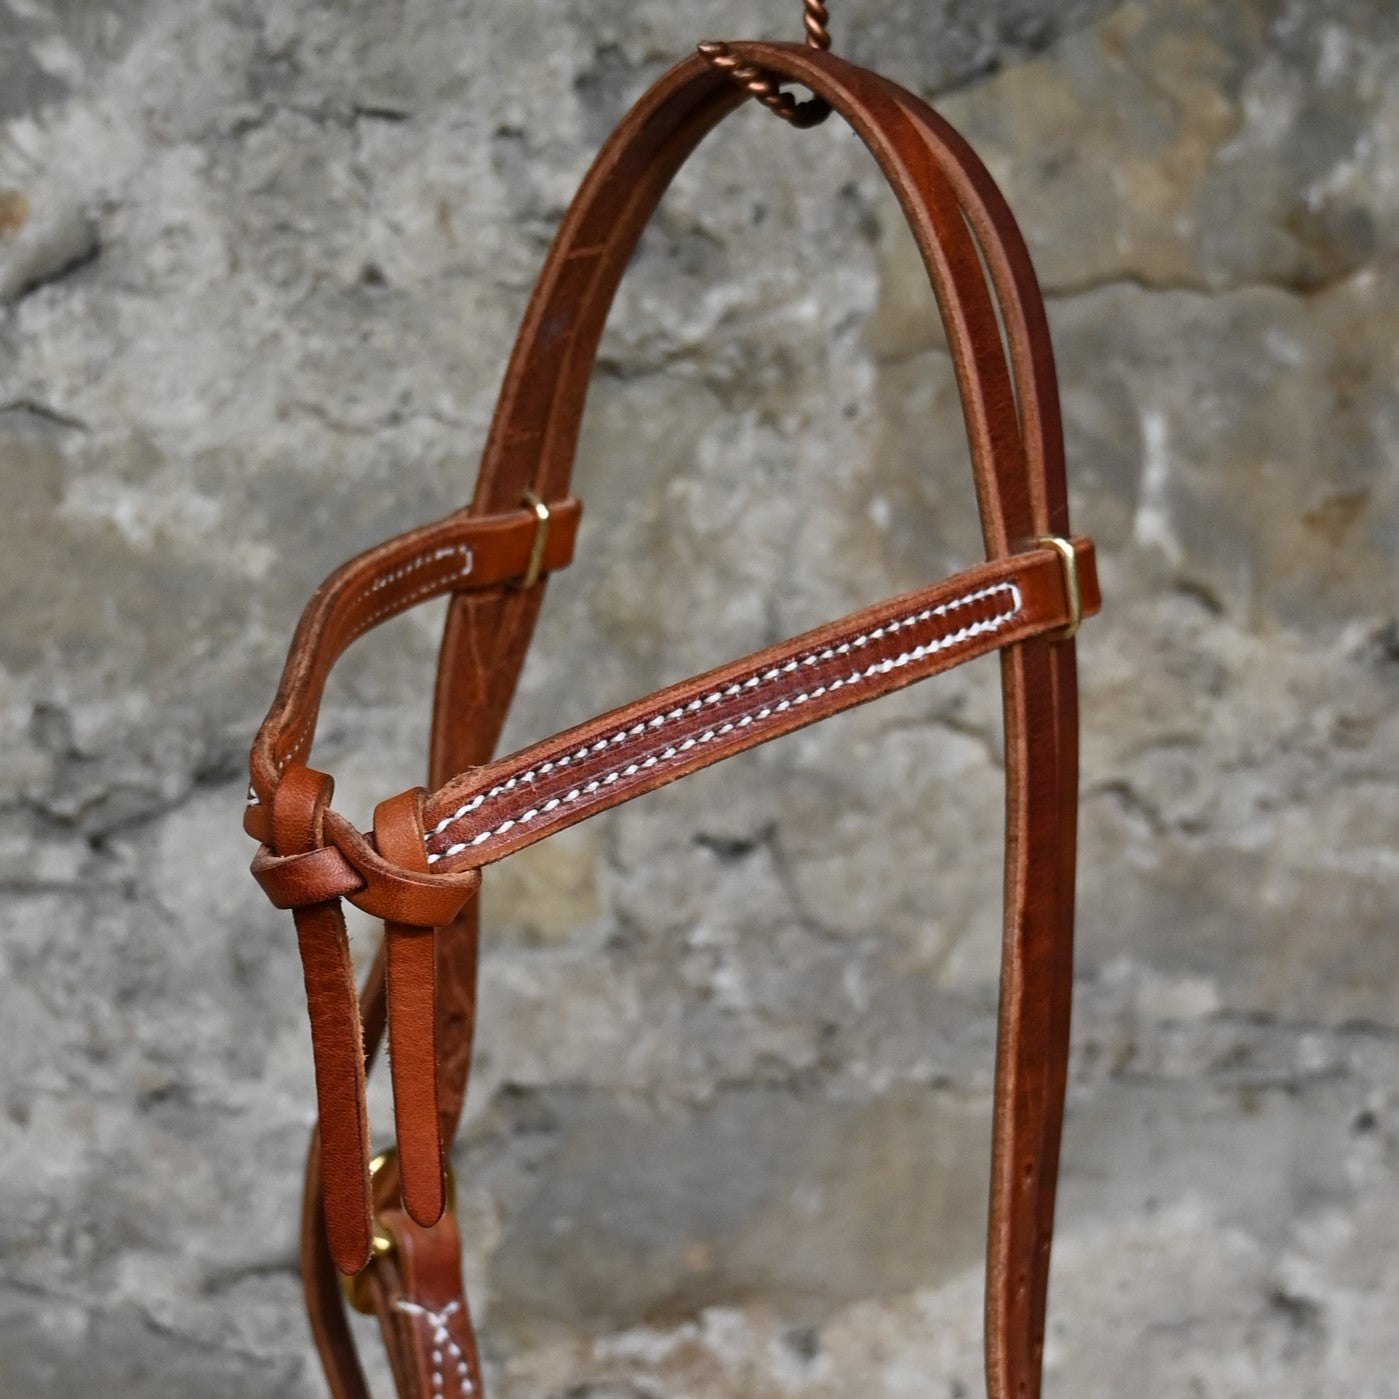 Knoted Browband Headstall with Ties close up view of headstall